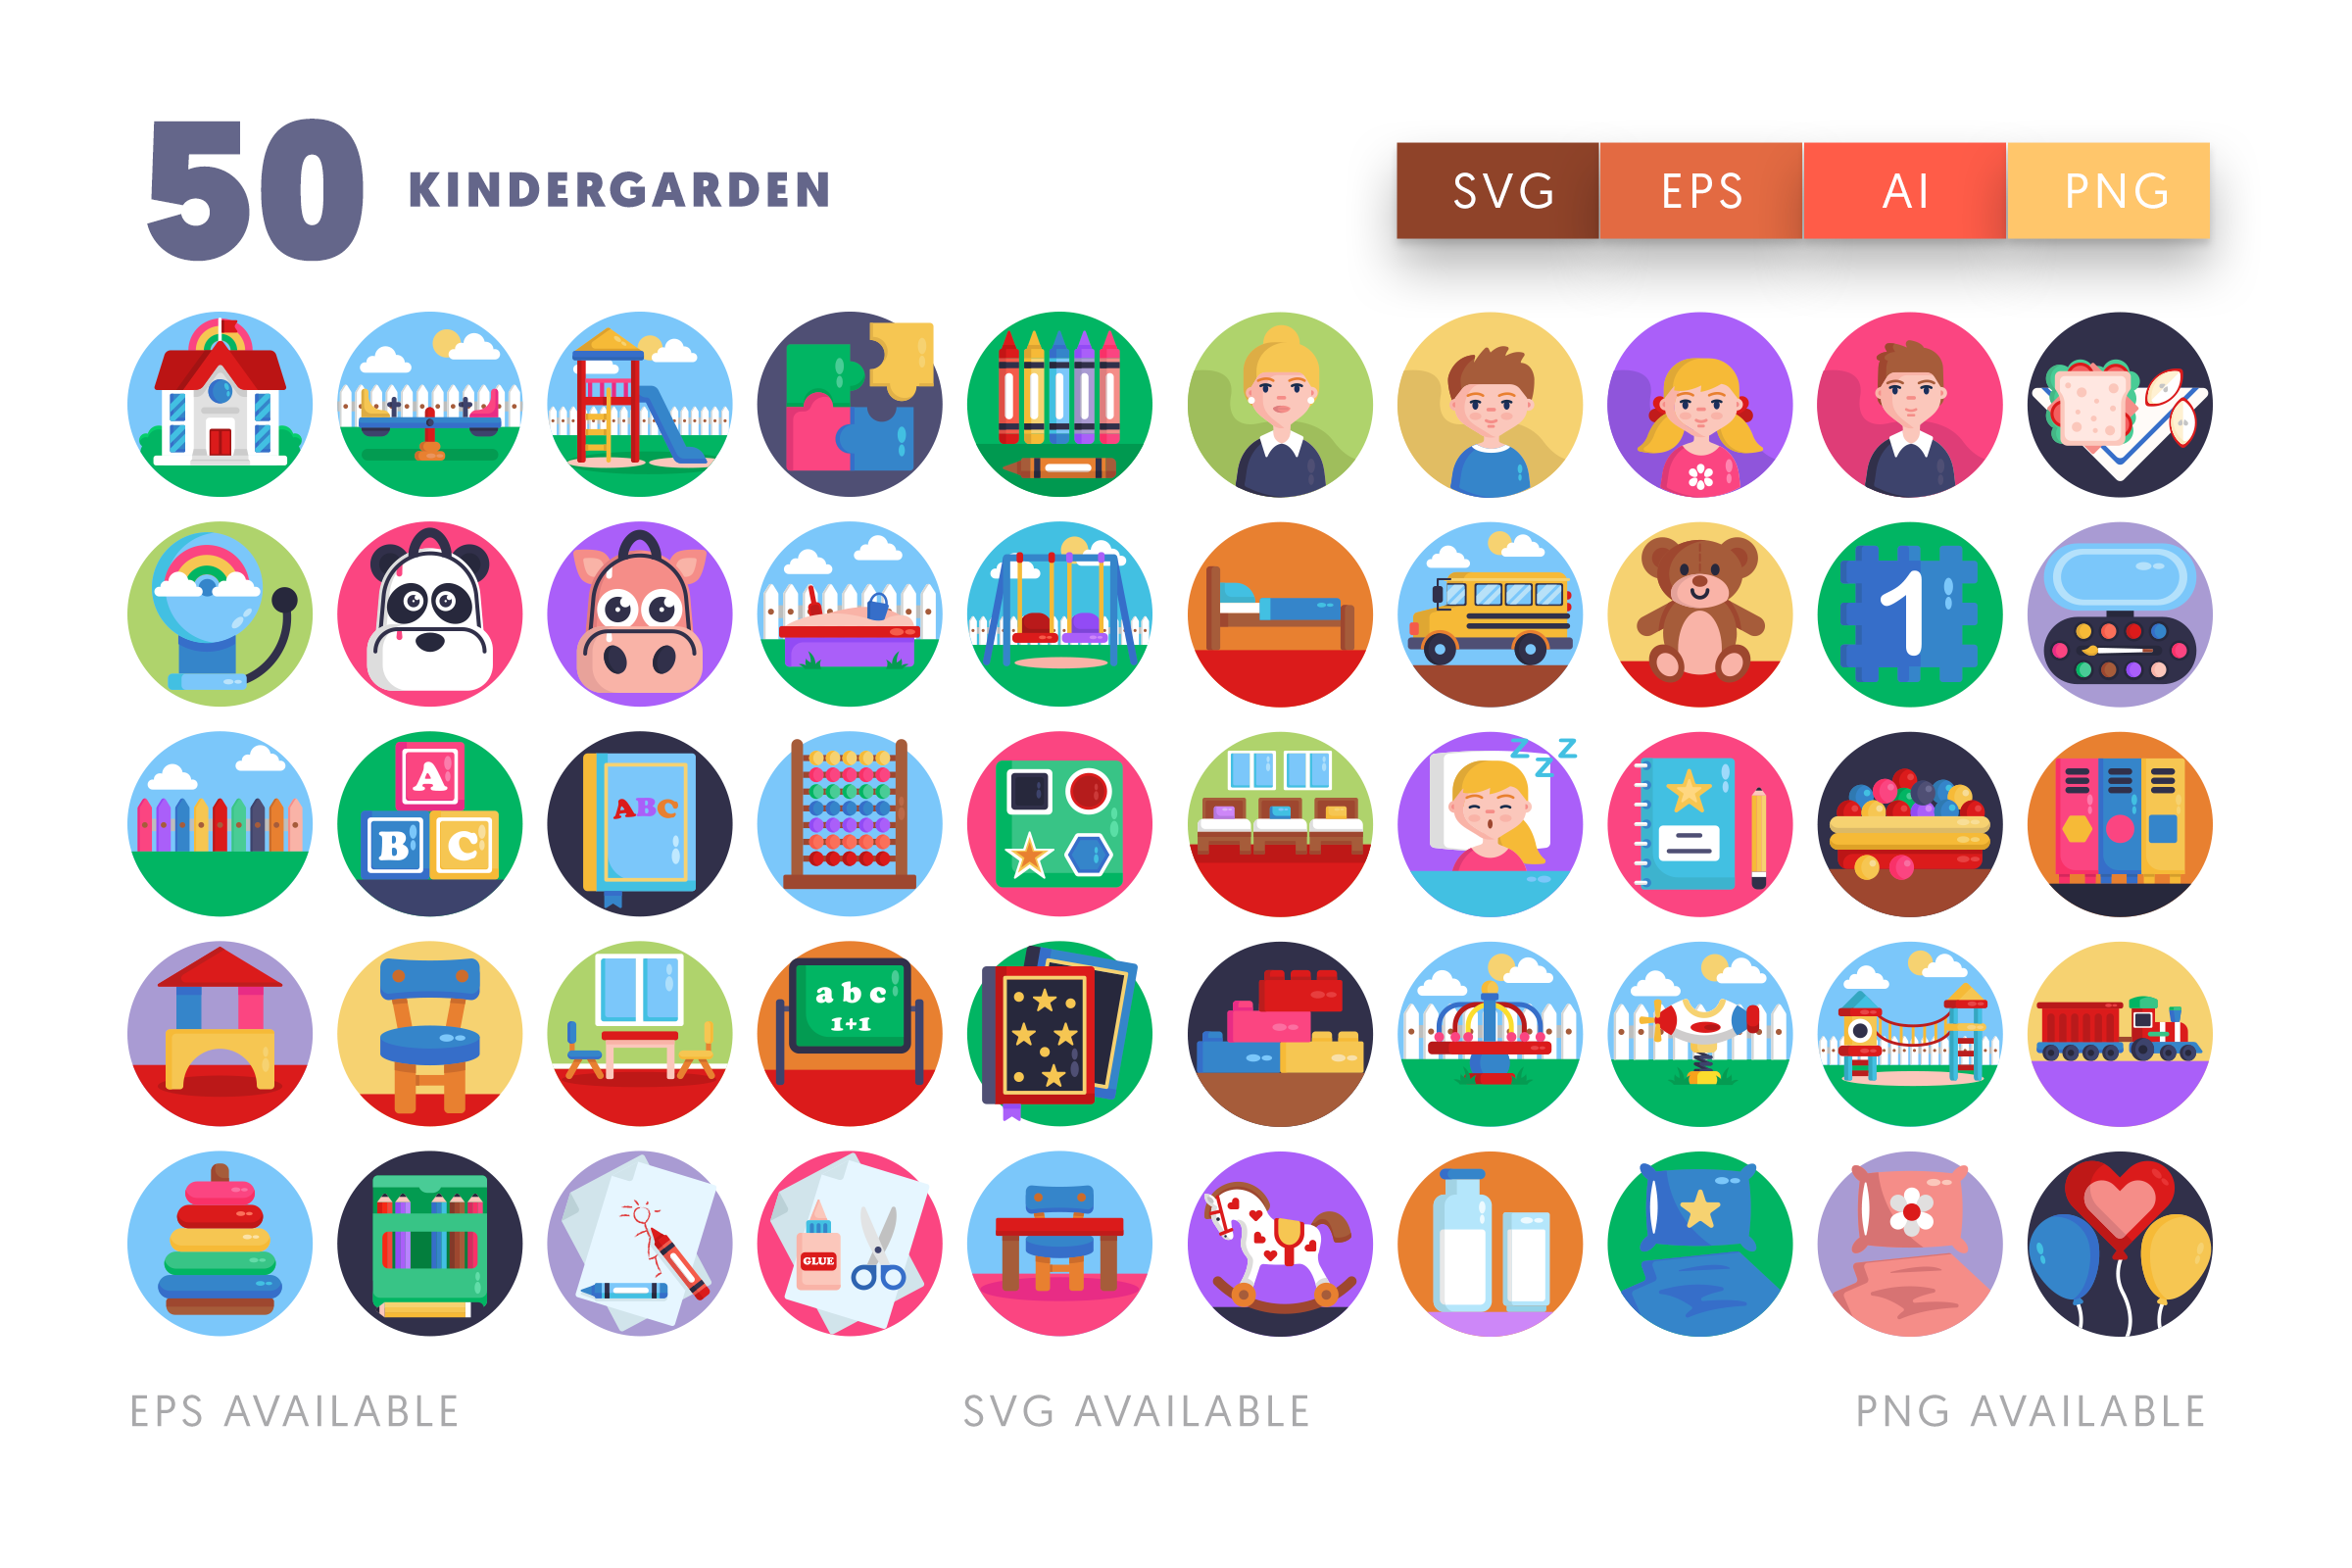 Kindergarden icons png/svg/eps